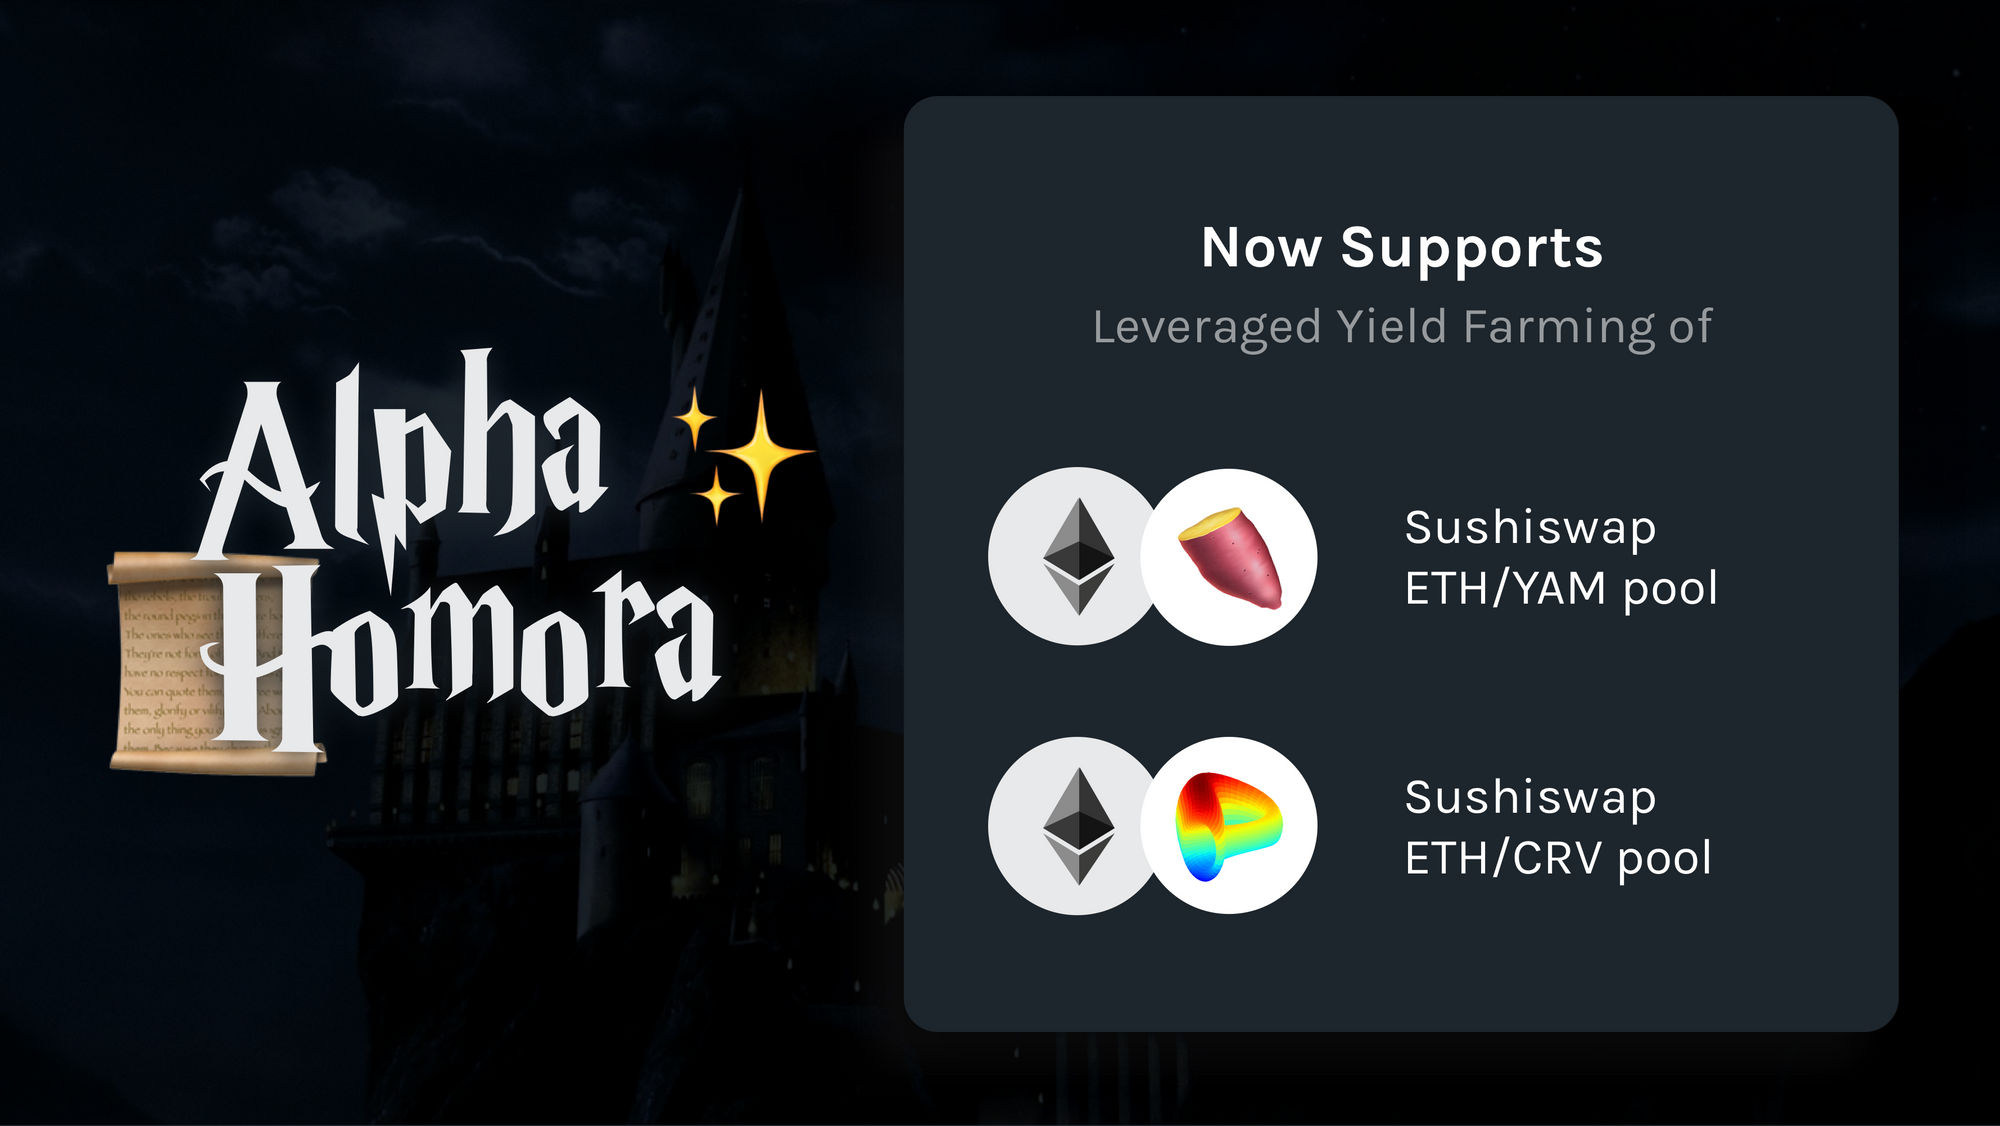 Alpha Homora adds leveraged yield farming for ETH/CRV and ETH/YAM pools on SushiSwap